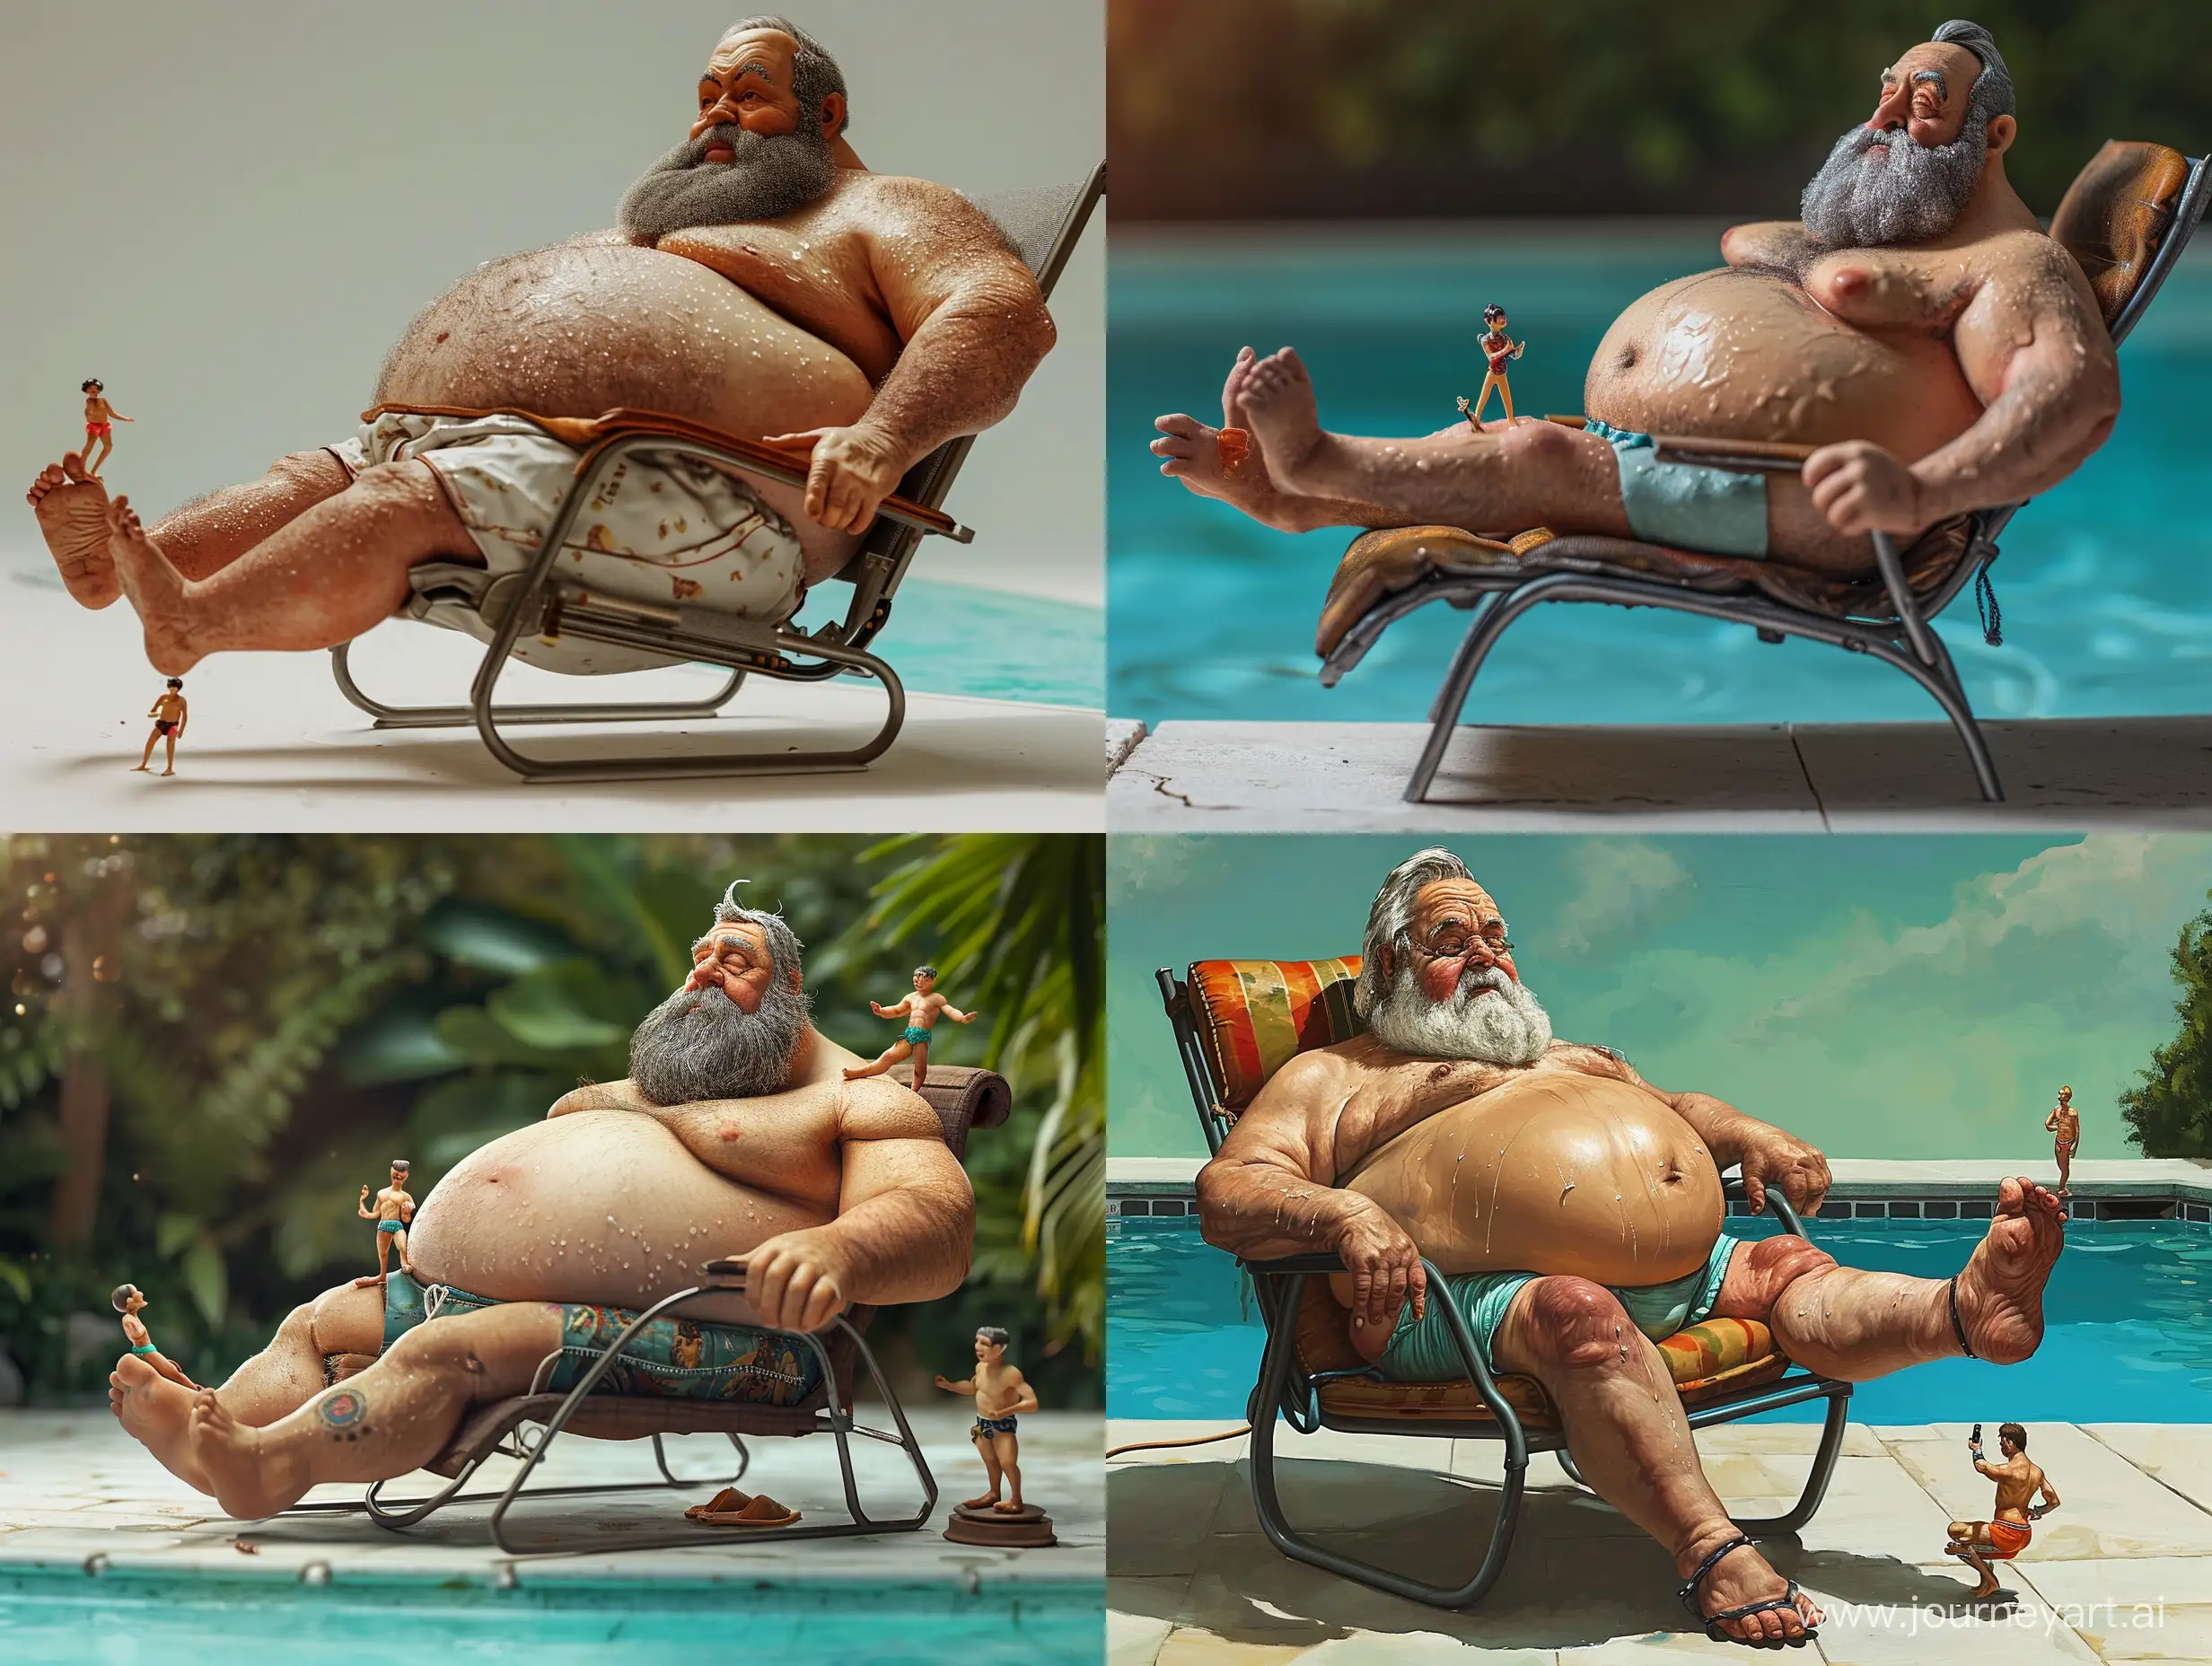 Giantz overweight and big bellied 50-year-old bearded man, wearing tiny swim trunks, laying back on a pool recliner, clear detailed face, tiny man on his toes